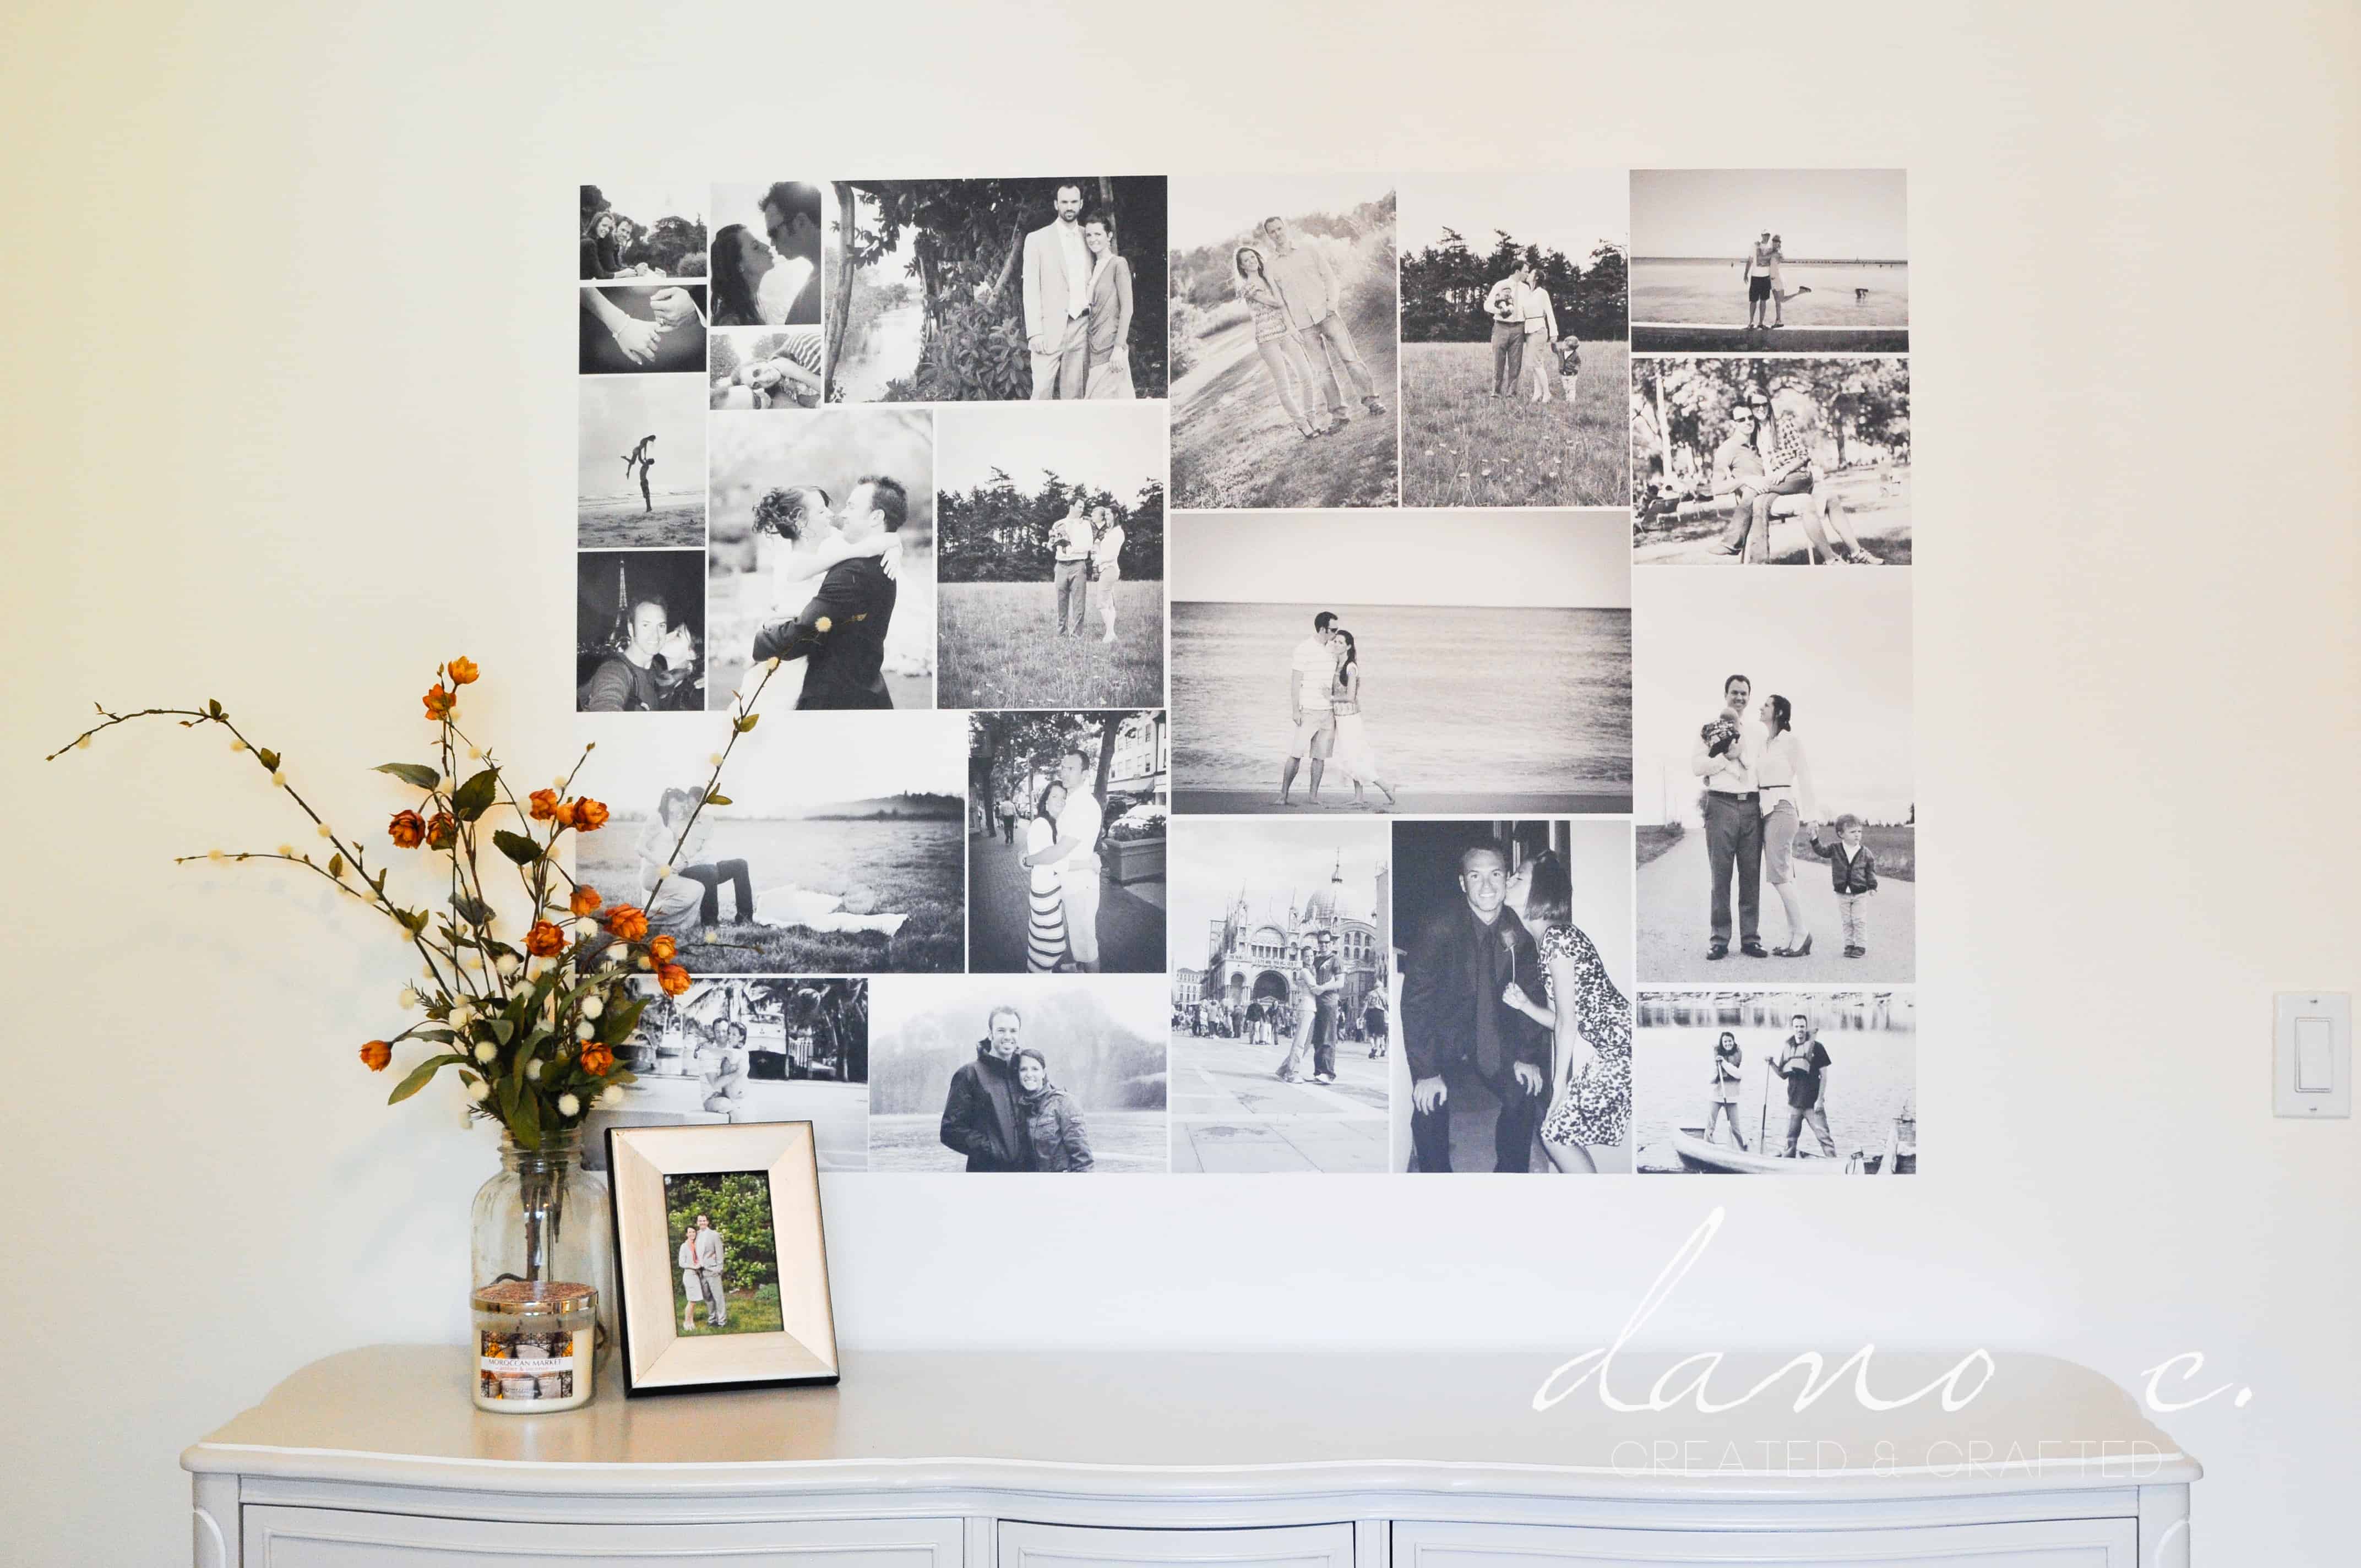 How to Turn a Photo Collage Into a Removable Wall Adhesive